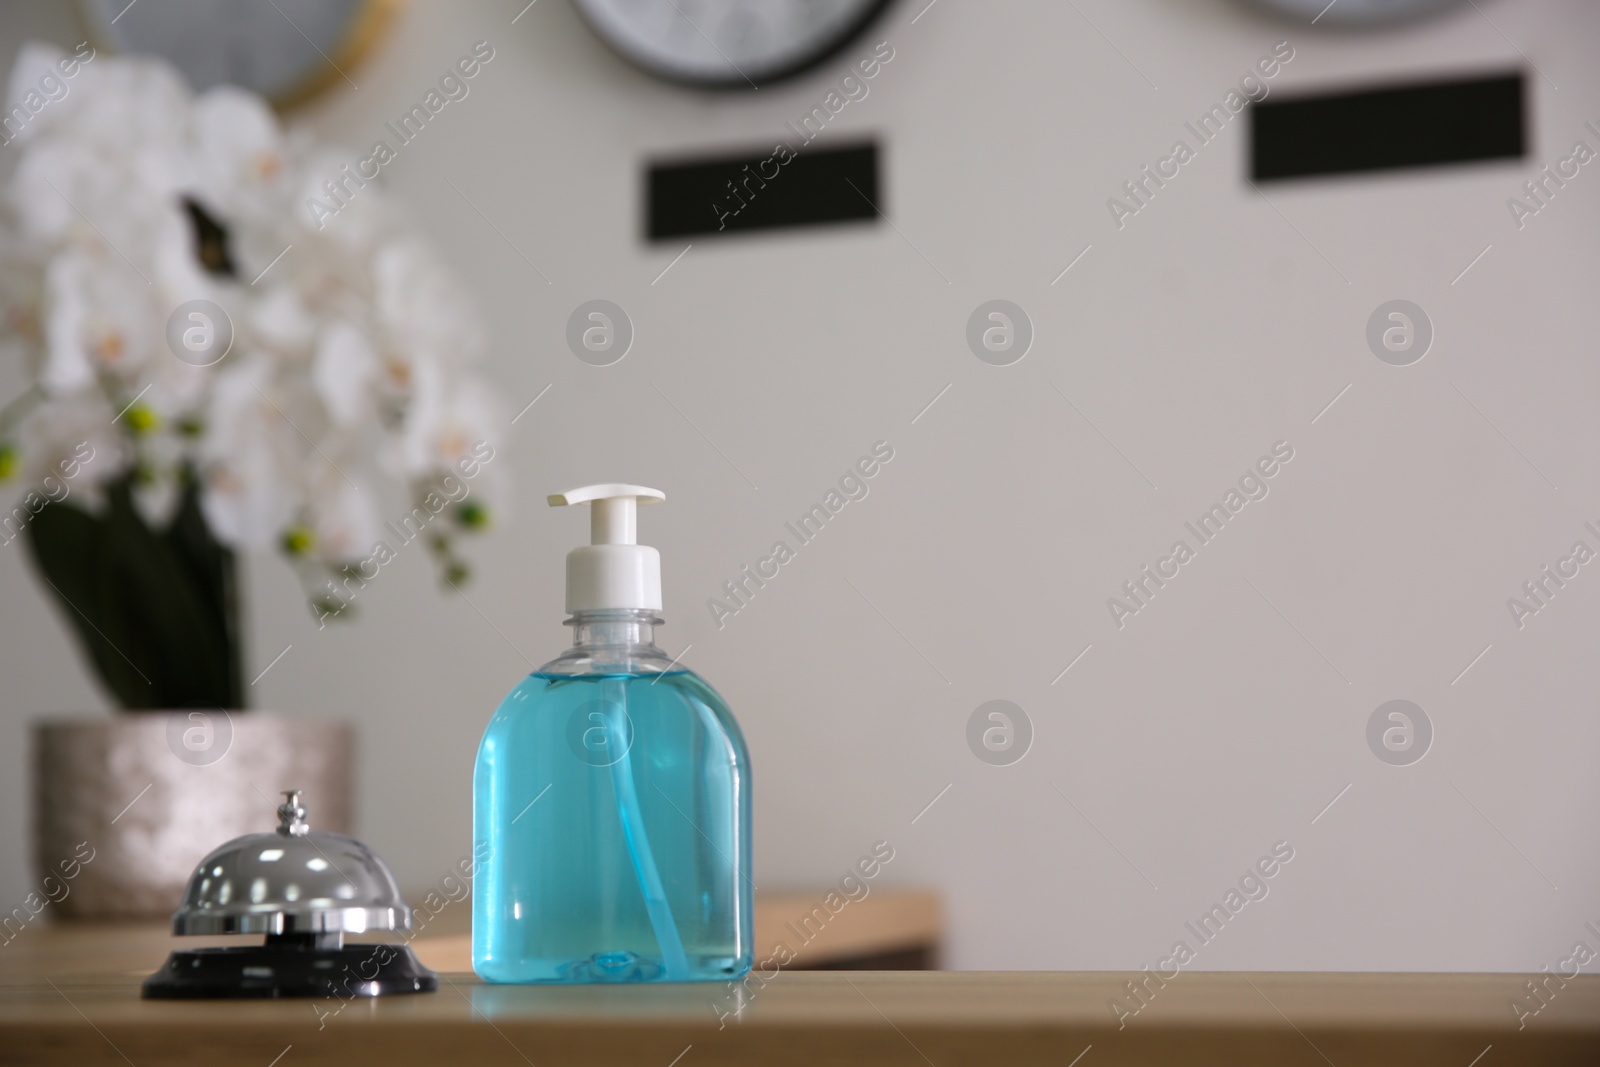 Photo of Dispenser bottle of antiseptic gel and service bell on reception desk in hotel. Space for text